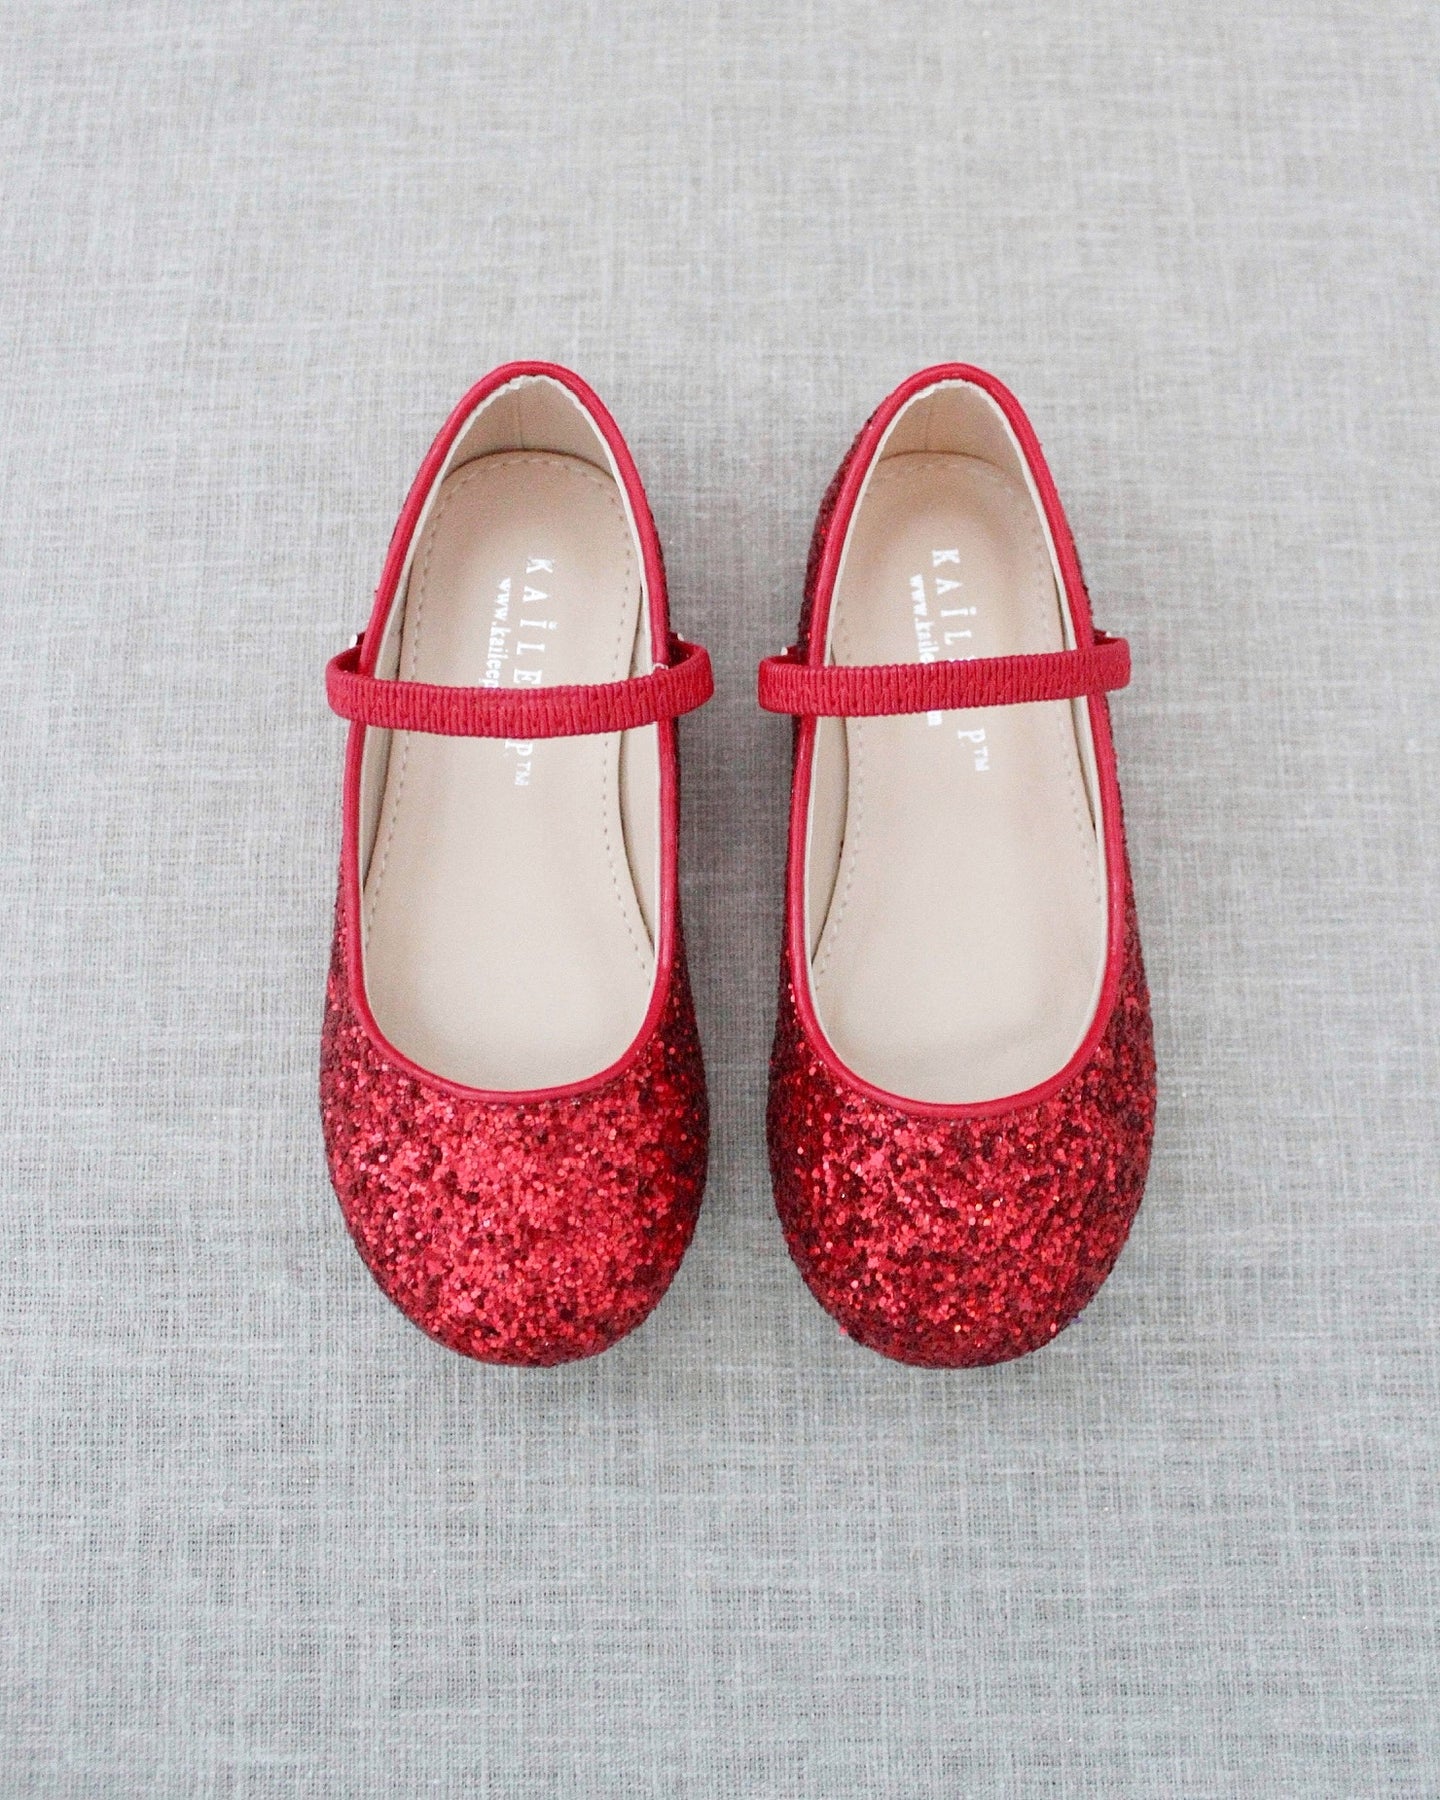 Gift Guide for 4-6 Year Old Girls · The Girl in the Red Shoes